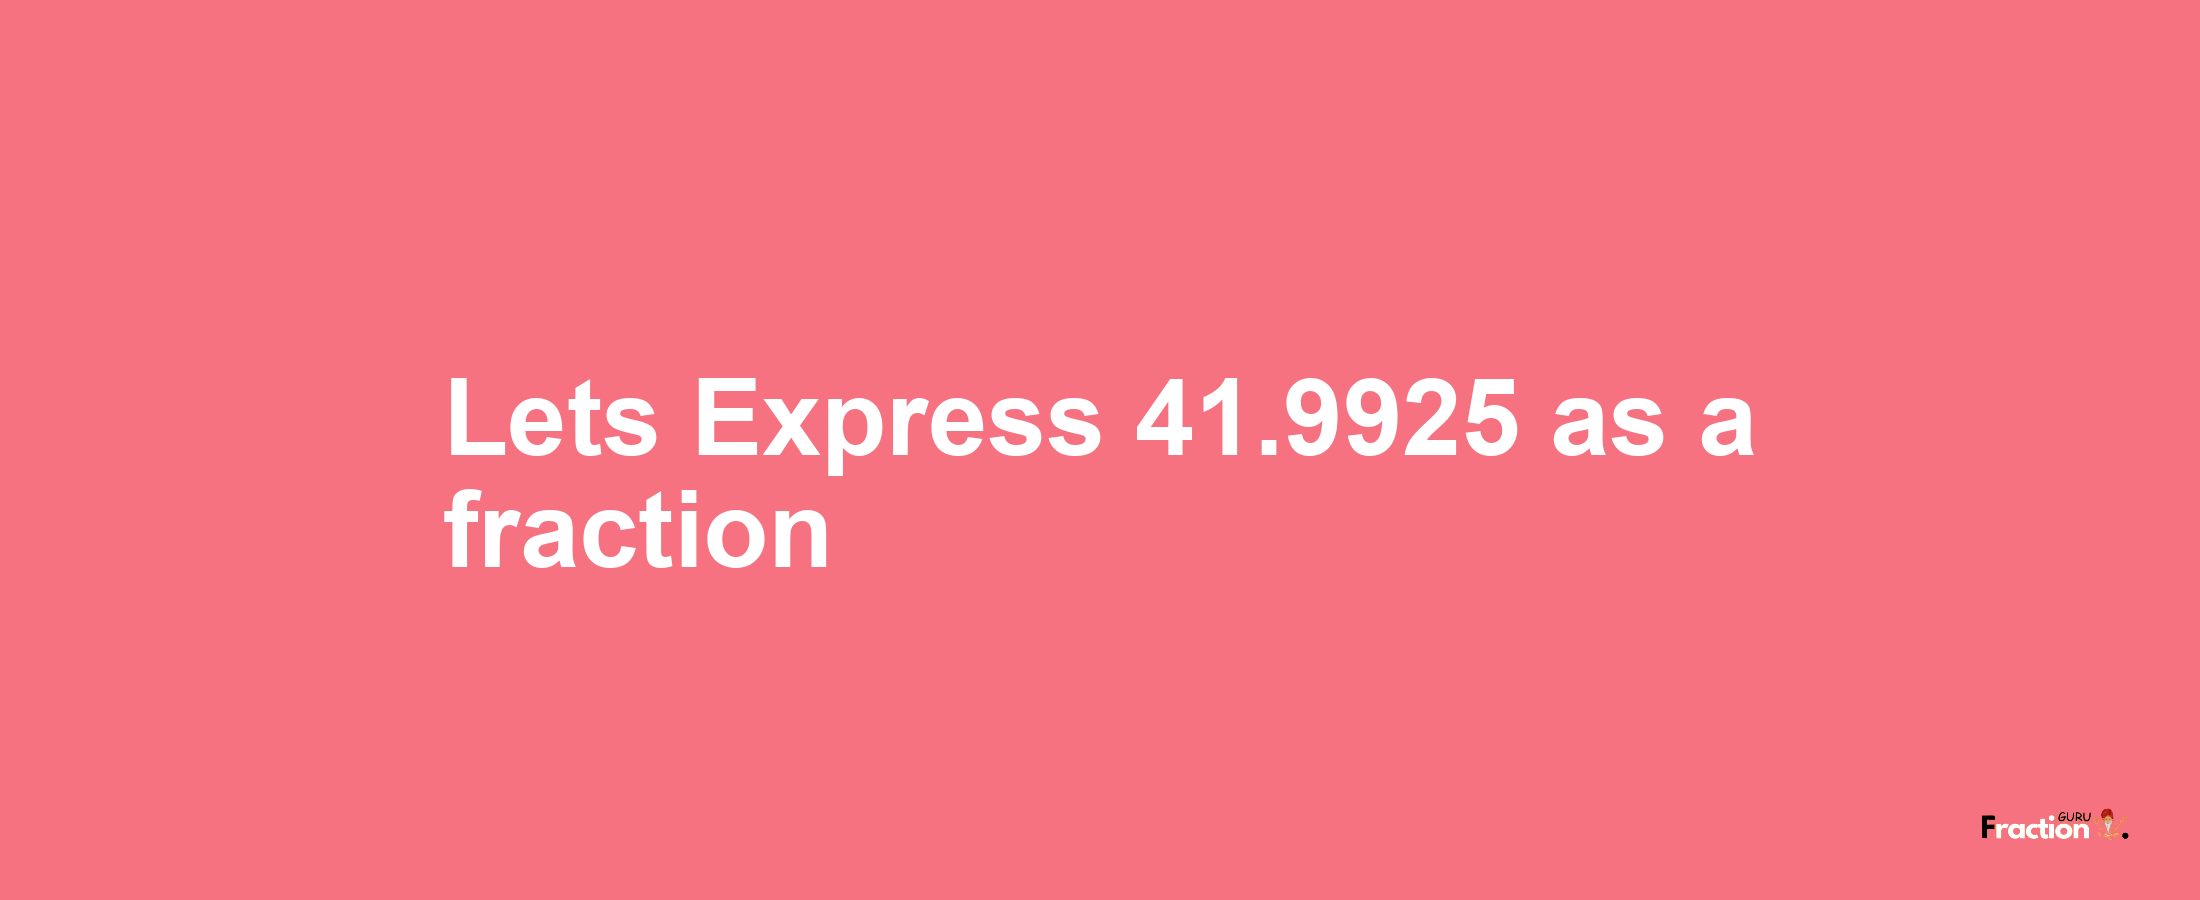 Lets Express 41.9925 as afraction